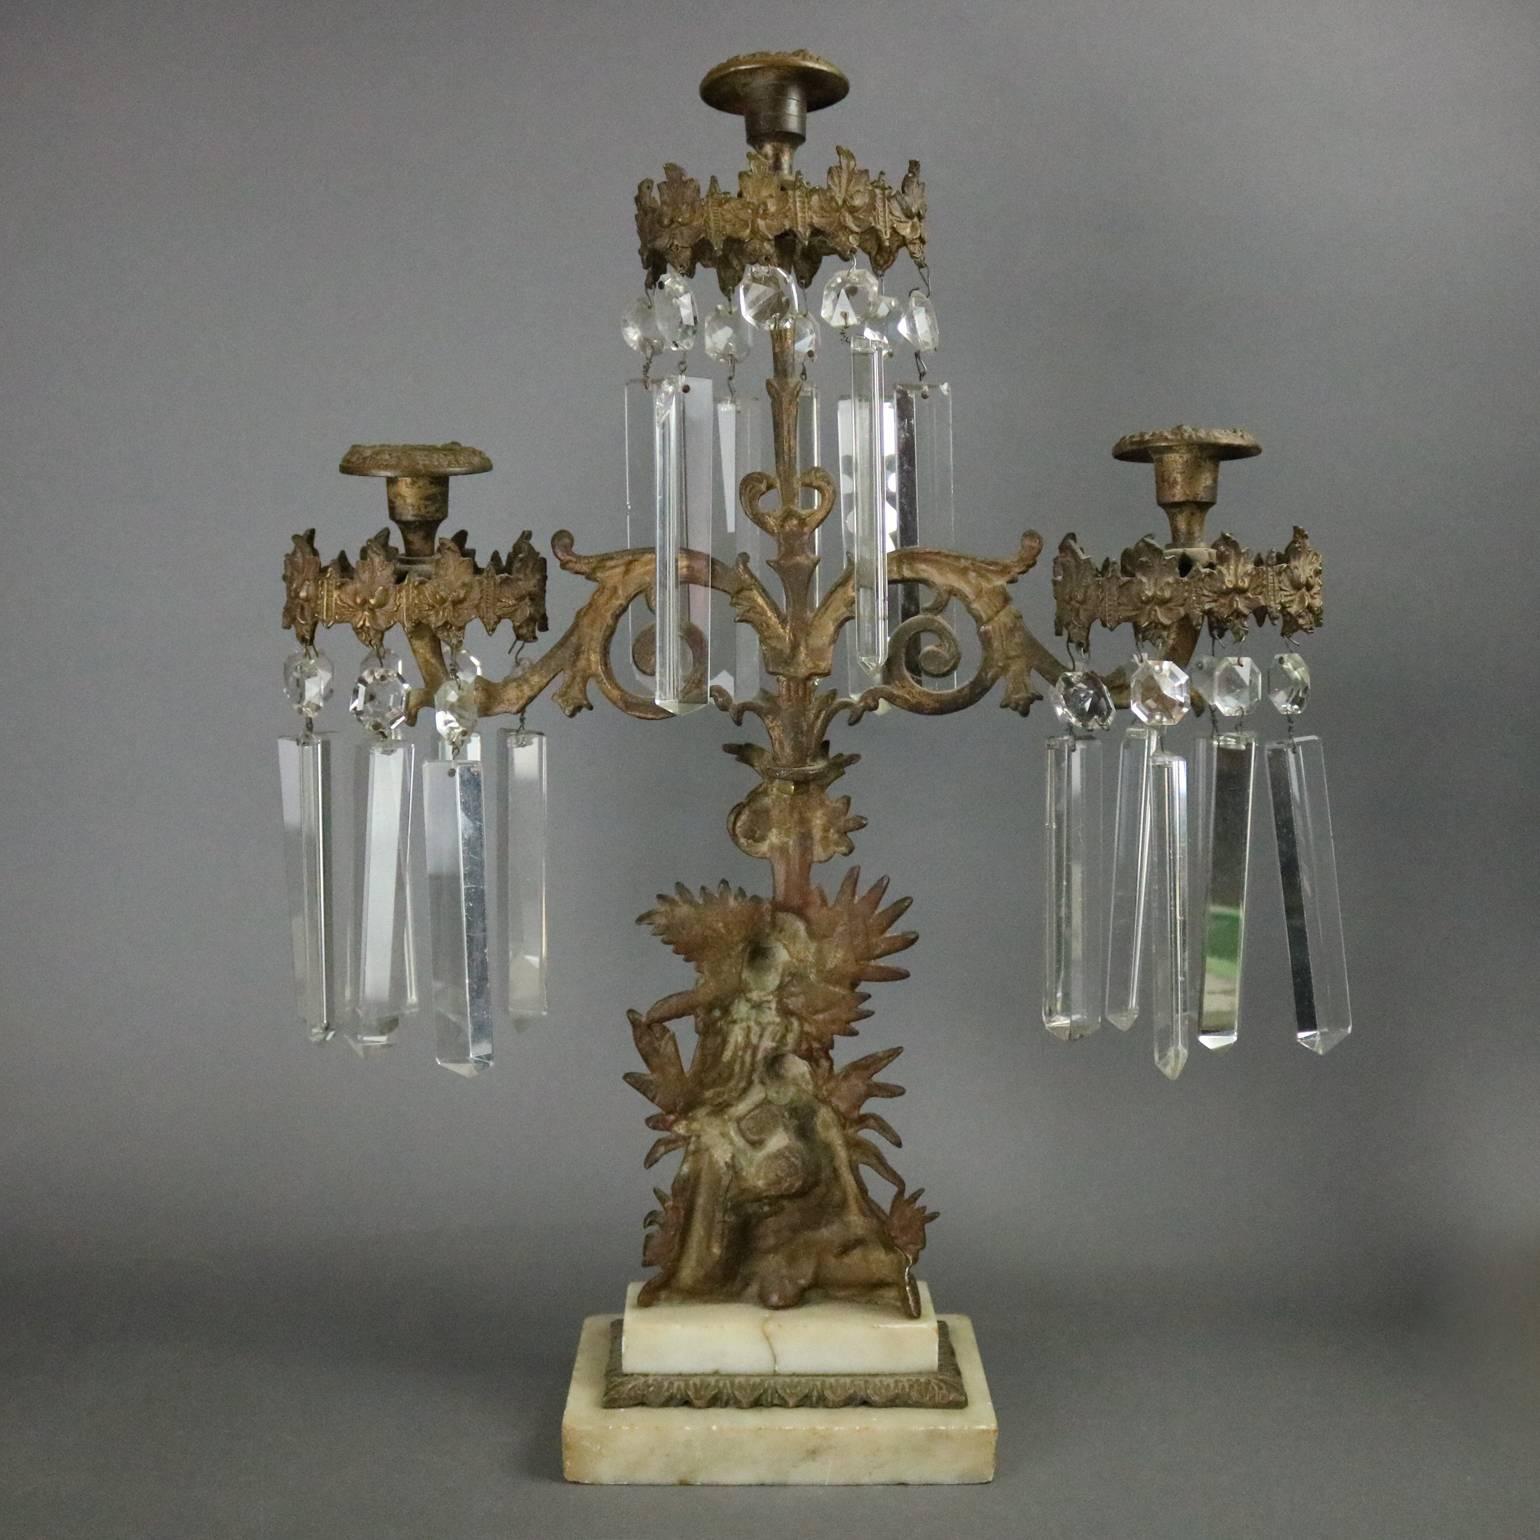 British Colonial Antique Three-Piece Early Bronze Marble and Crystal Girandole Set Colonial Scene